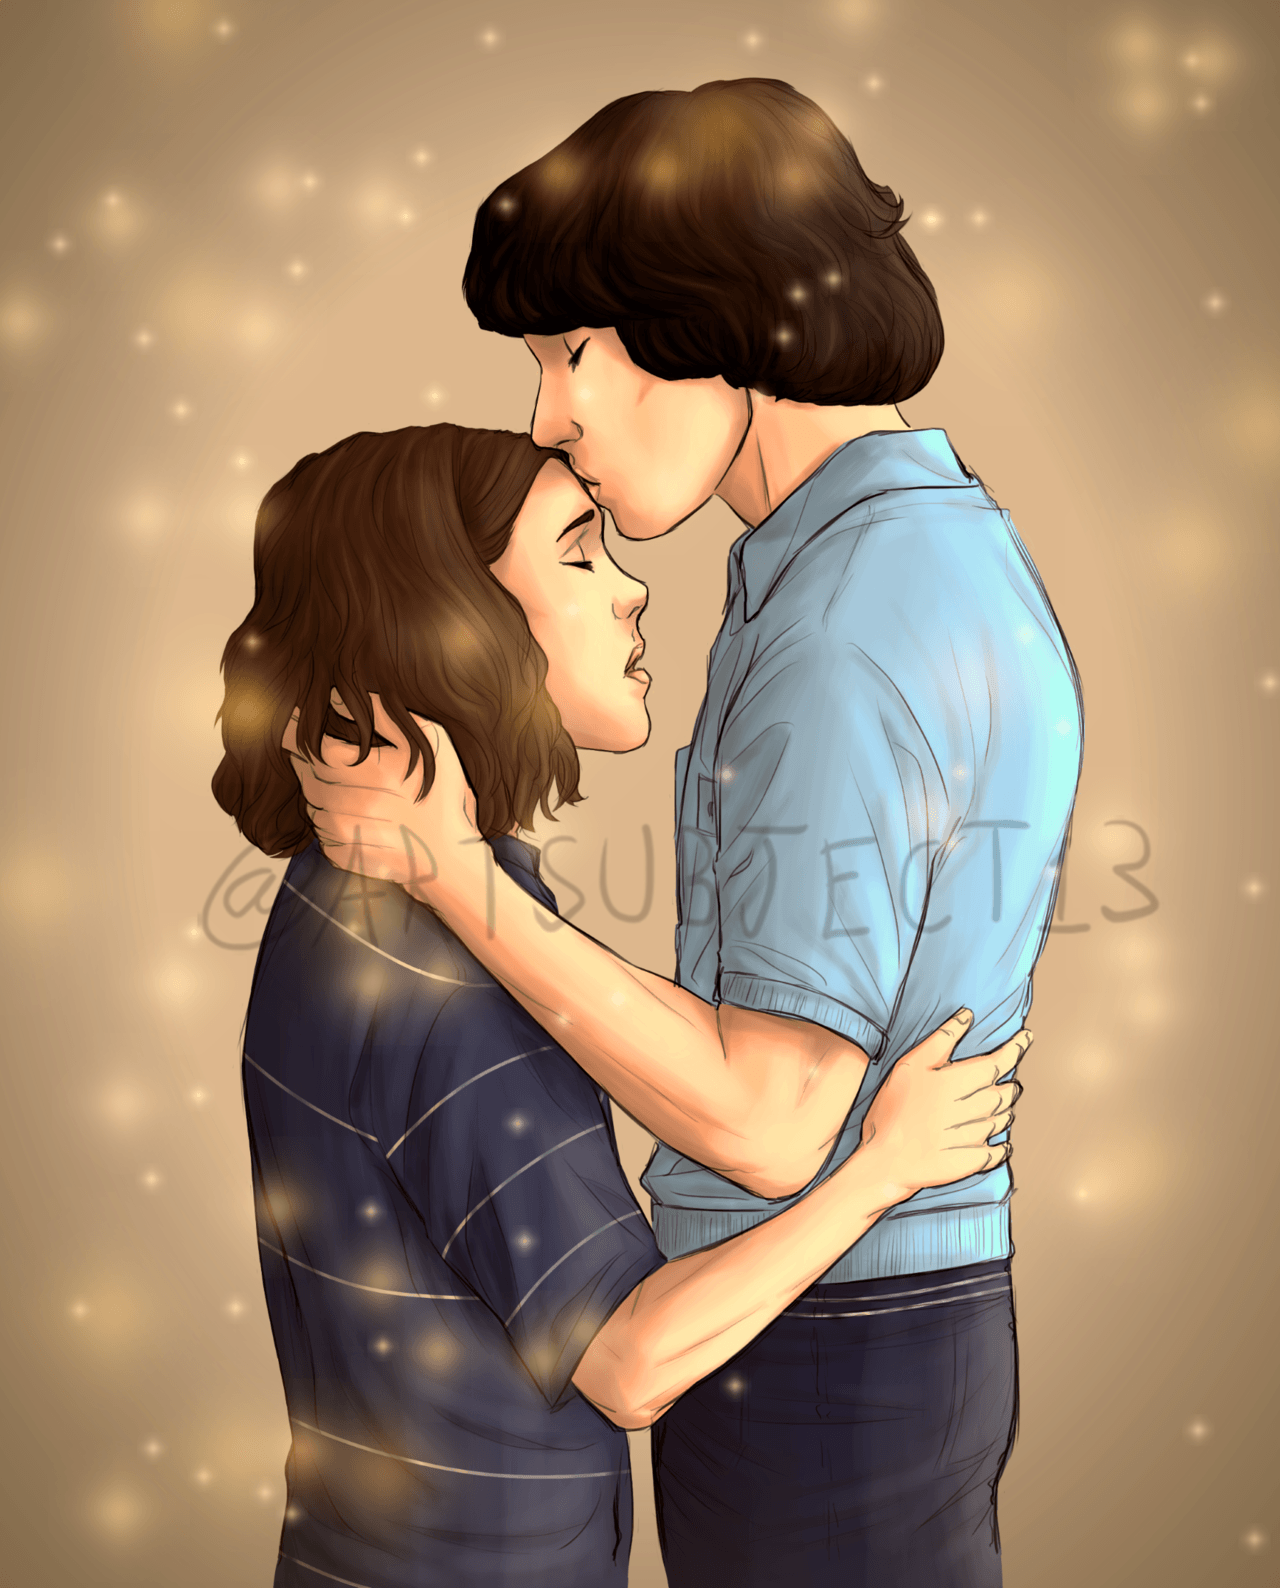 Mike and El in S3 Art credit goes to artsubject13 on Tumblr